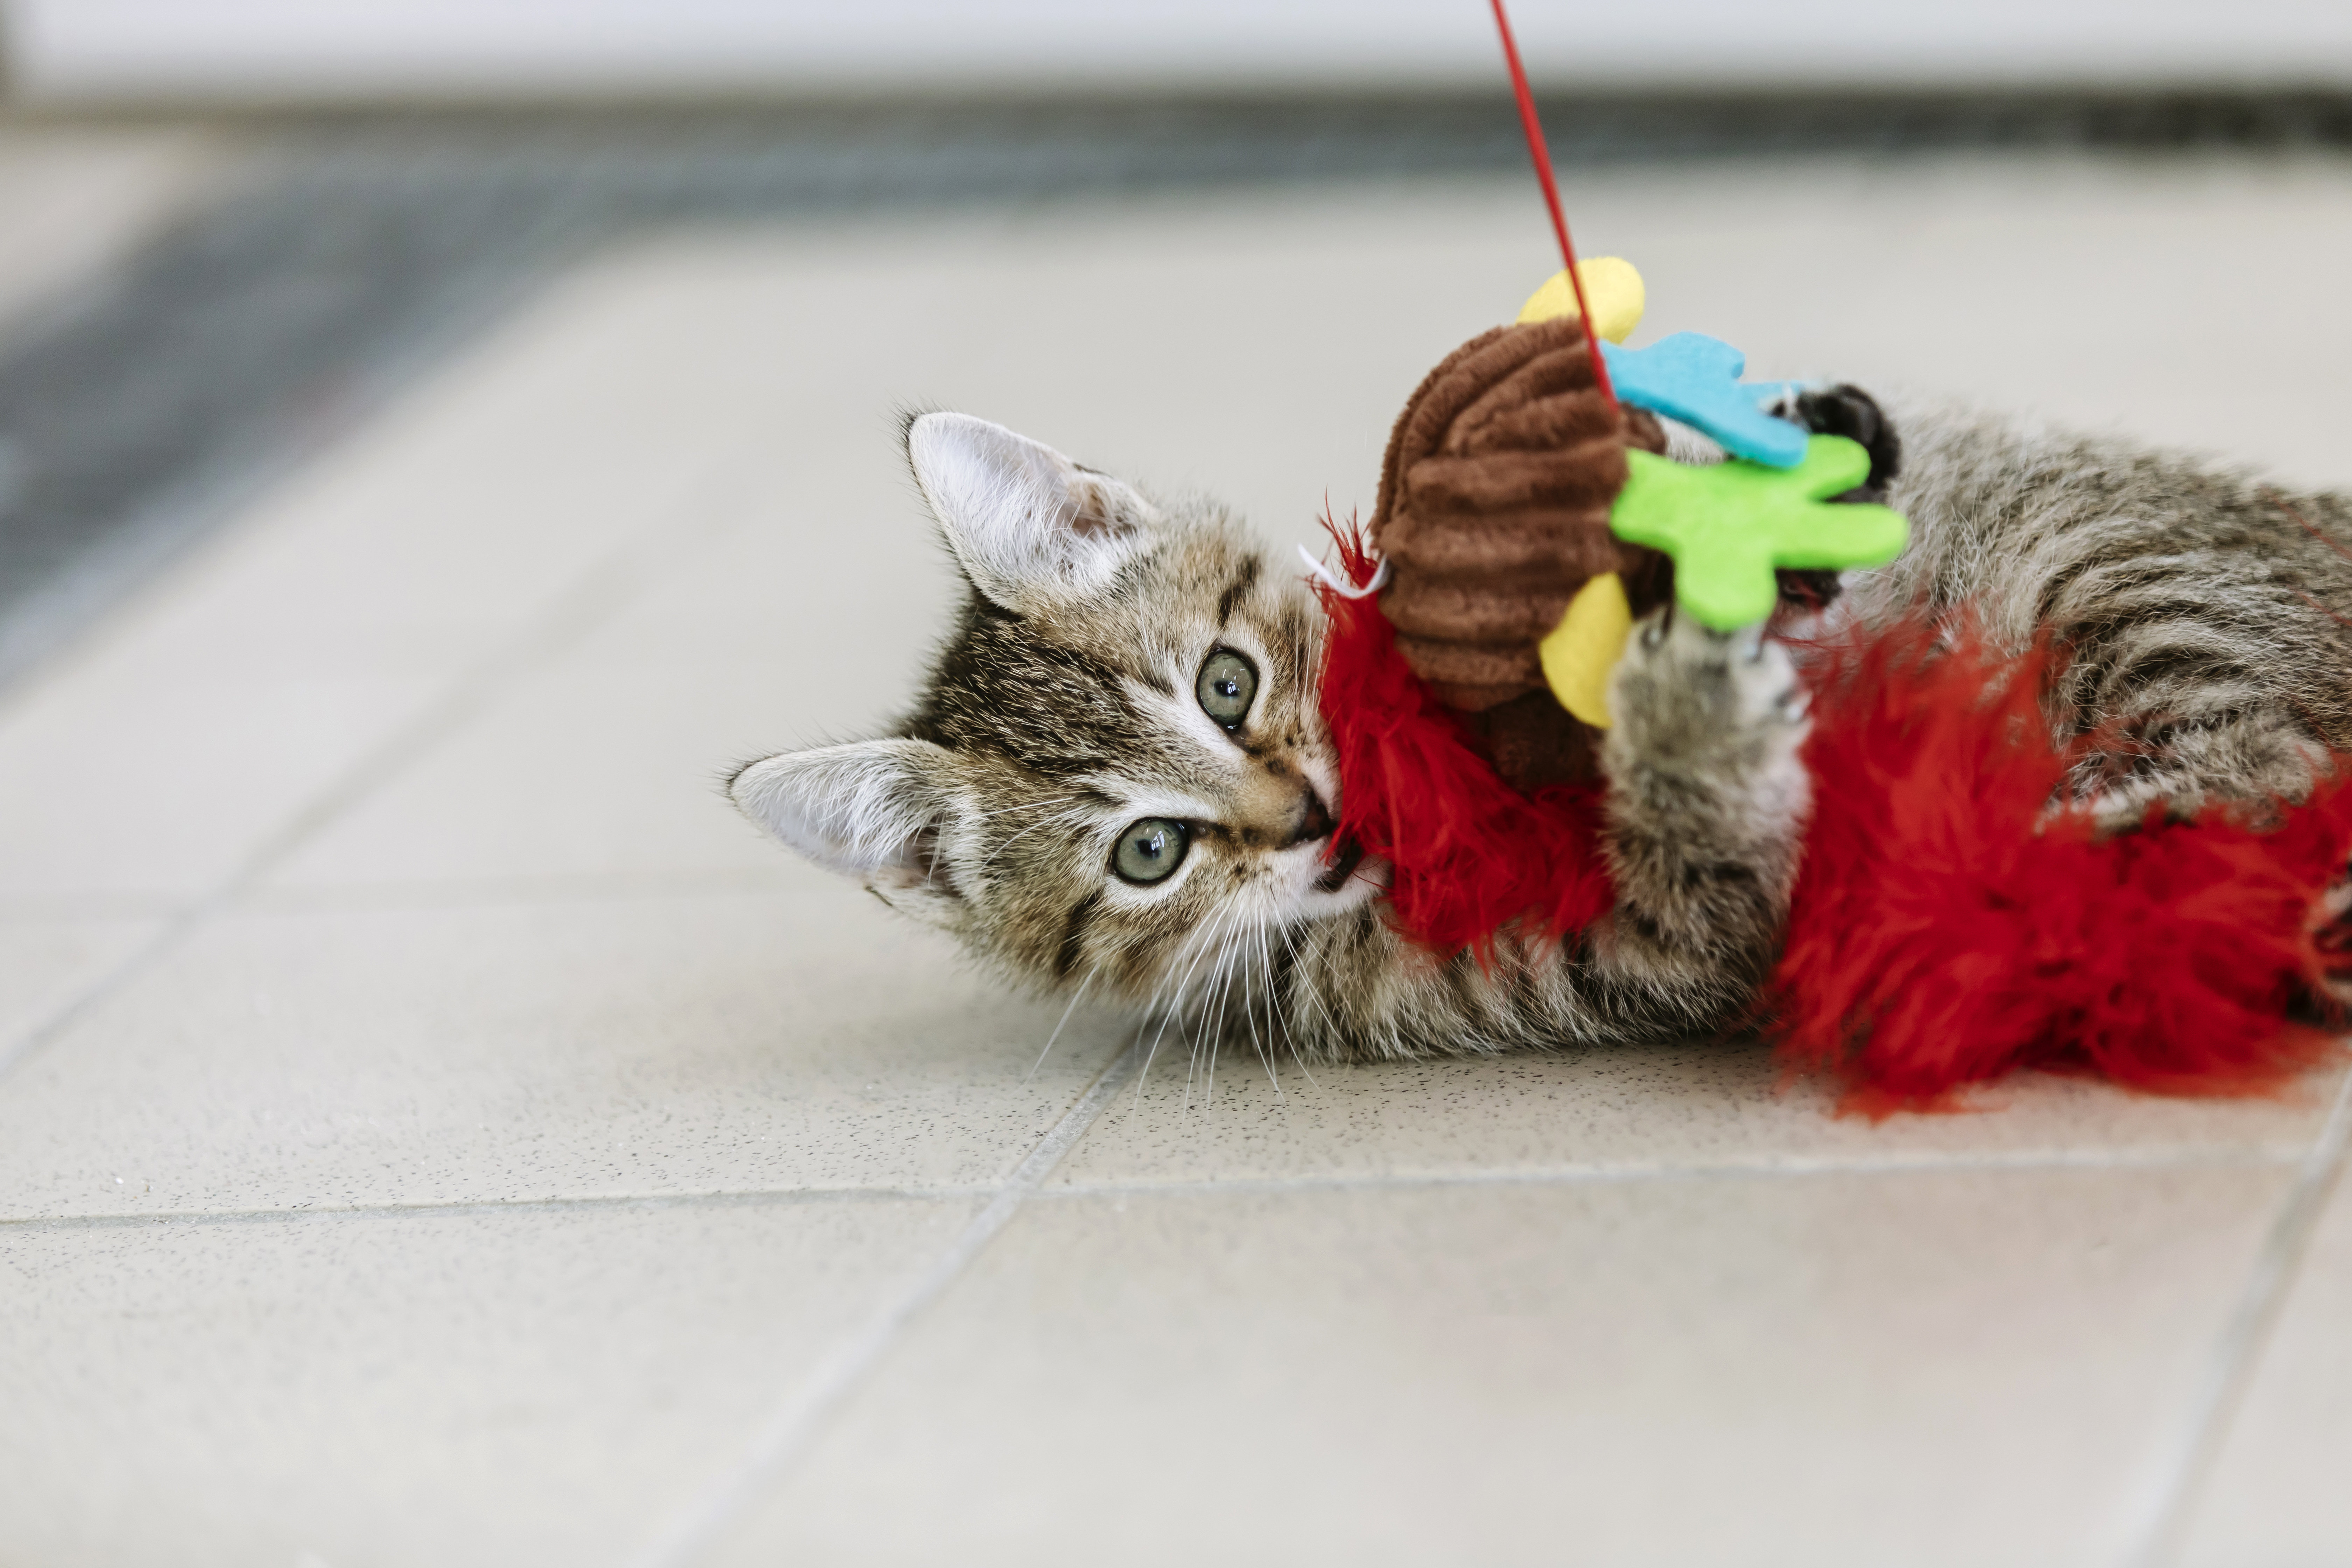 A young tabby kitten plays with a colourful cat wand.